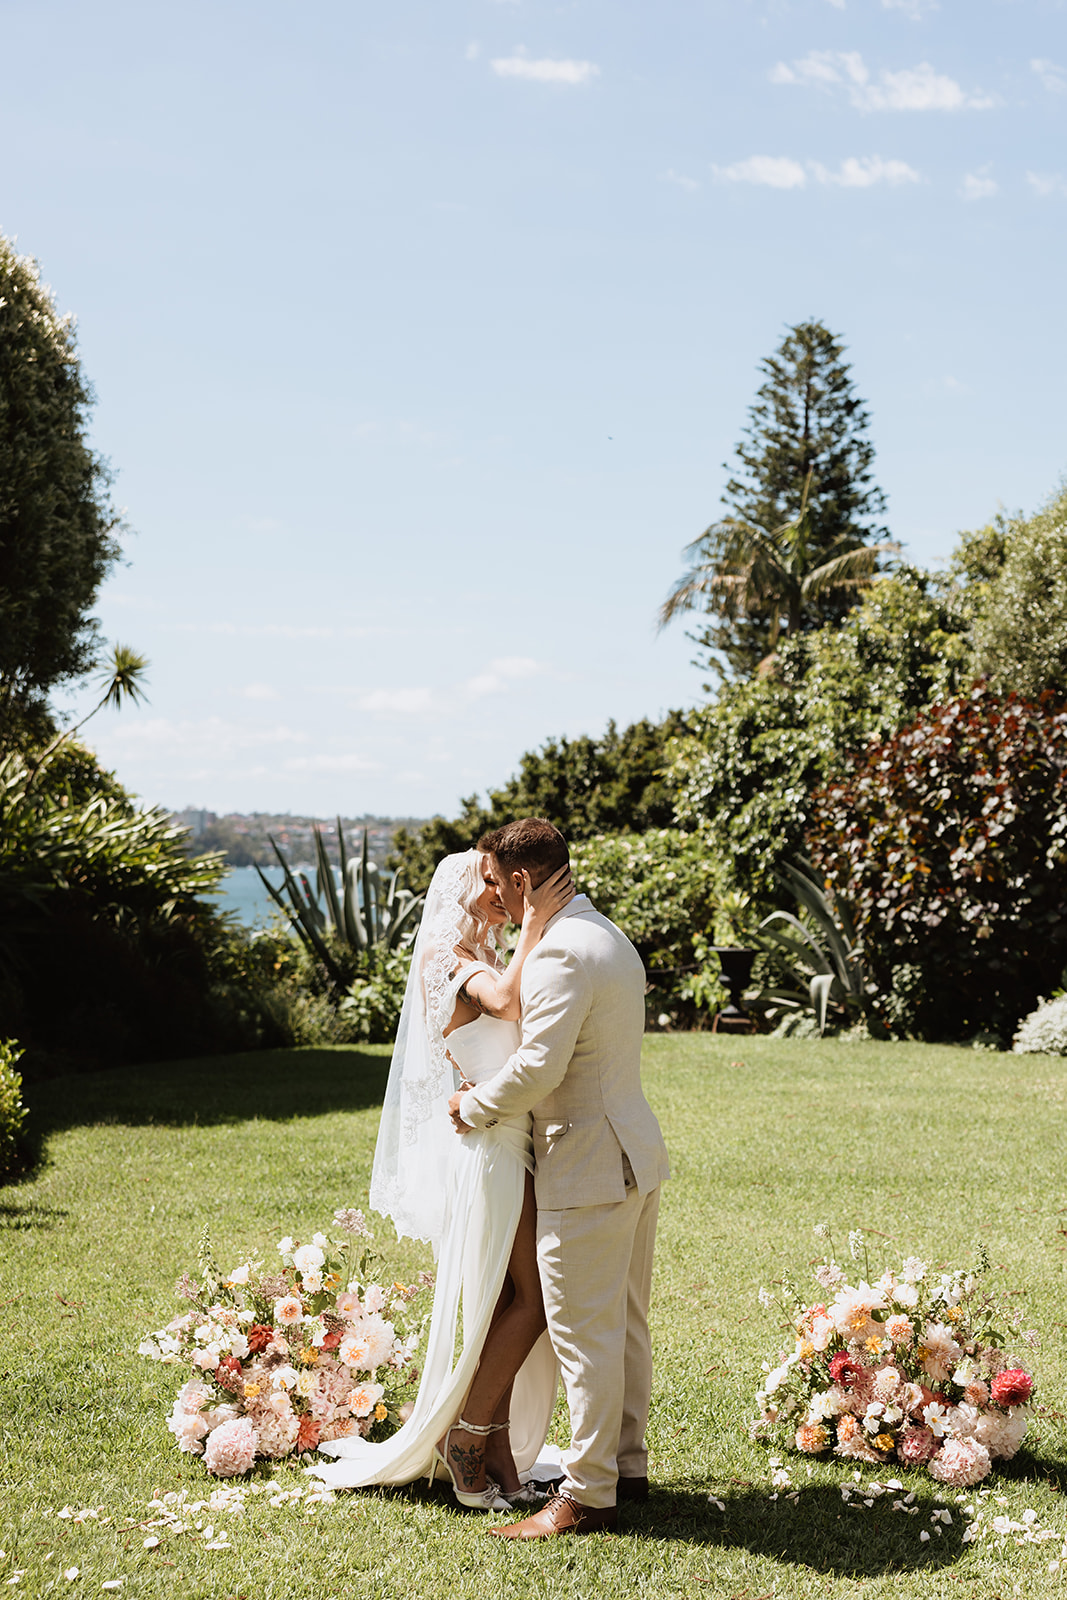 First kiss as a married couple at the Wedding in Lindesay House, Darling Point New South Wales